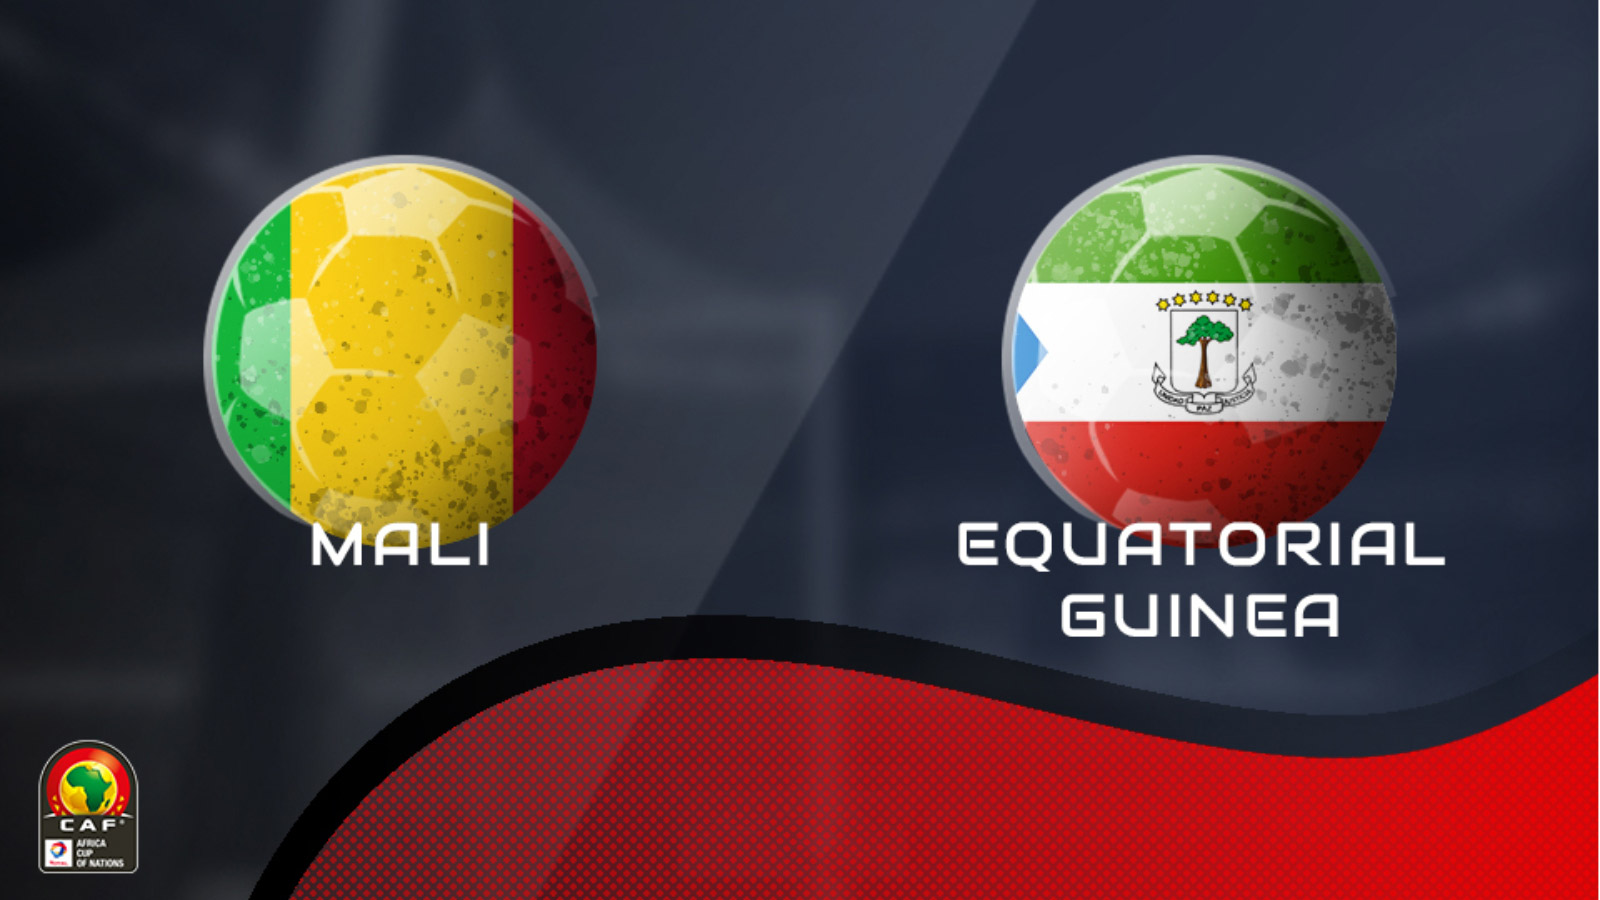 Video Clip Highlights: Mali vs Equatorial Guinea- CAN CUP 2021